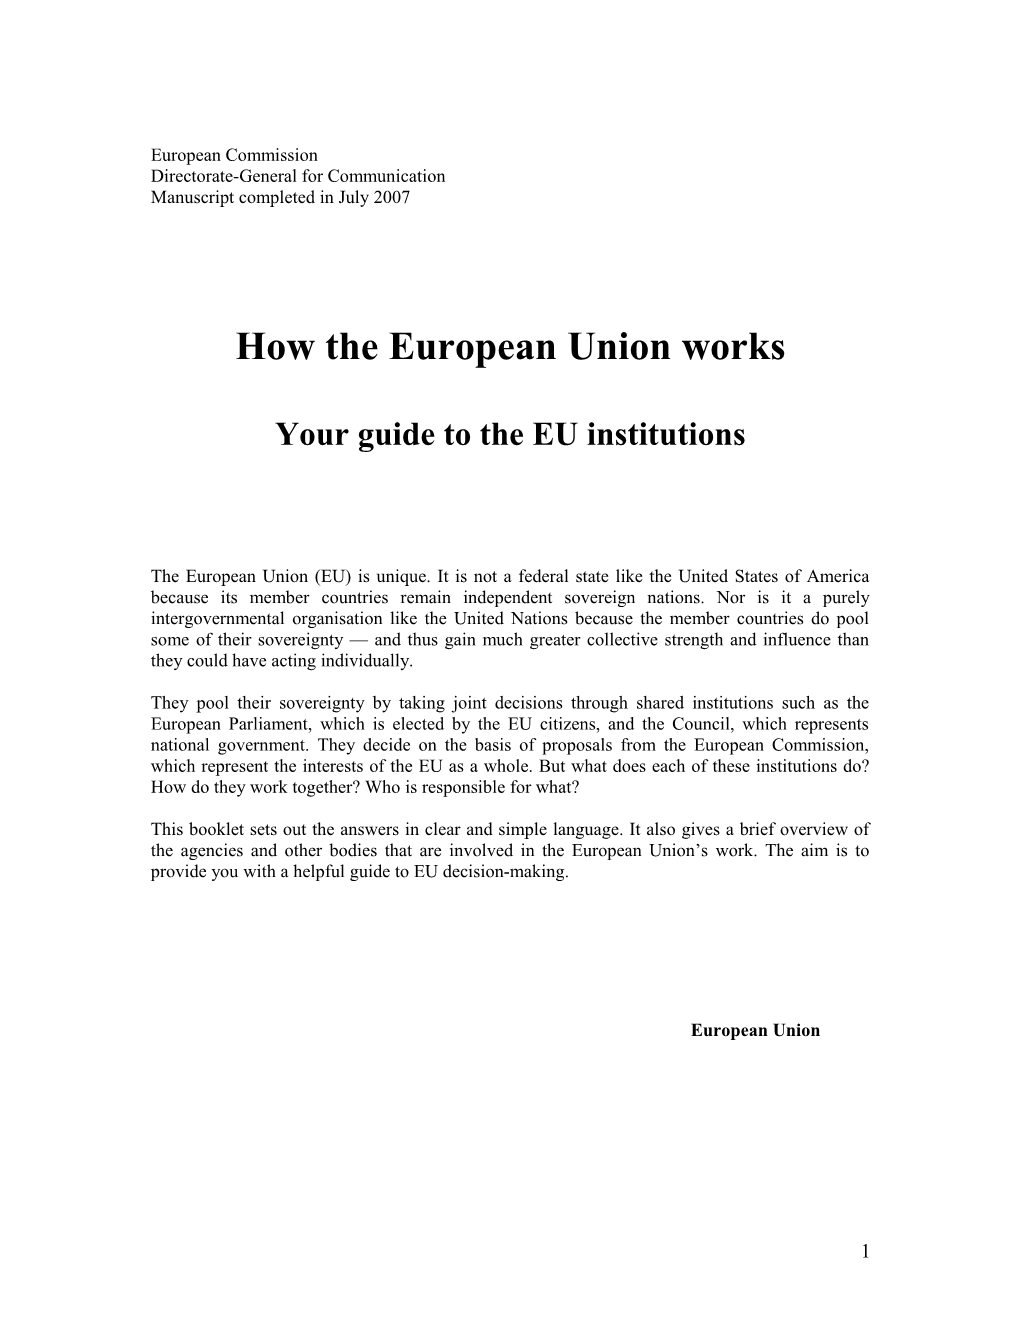 How the European Union Works -Your Guide to the EU Institutions